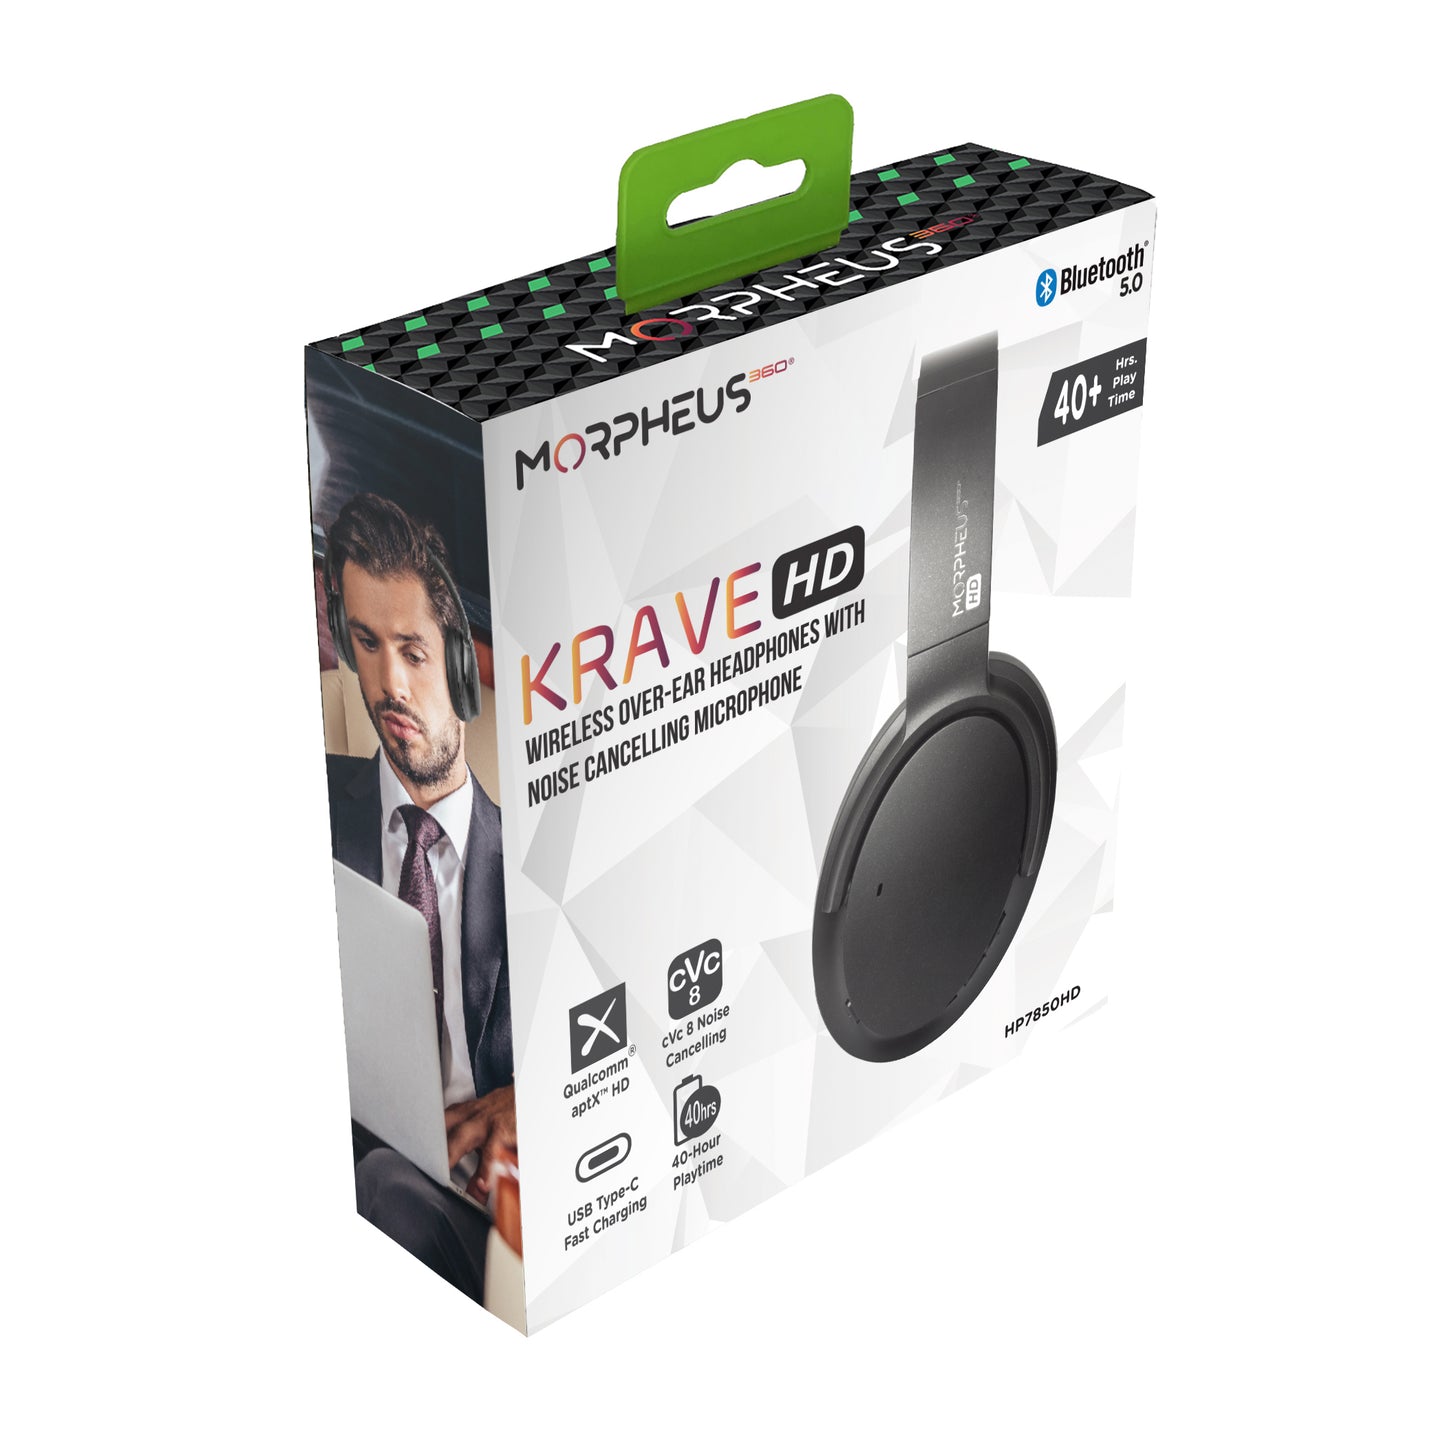 Photo of Morpheus 360 Krave HD Wireless Headphones Retail packaging. The front of the retail packaging displays the side view of the Krave HD headphones, as well as, Bluetooth 5.0, 40+ hours playtime, Qualcomm aptX HD, cVc 8 Noise cancelling, and USB Type-C Fast Charging features. 